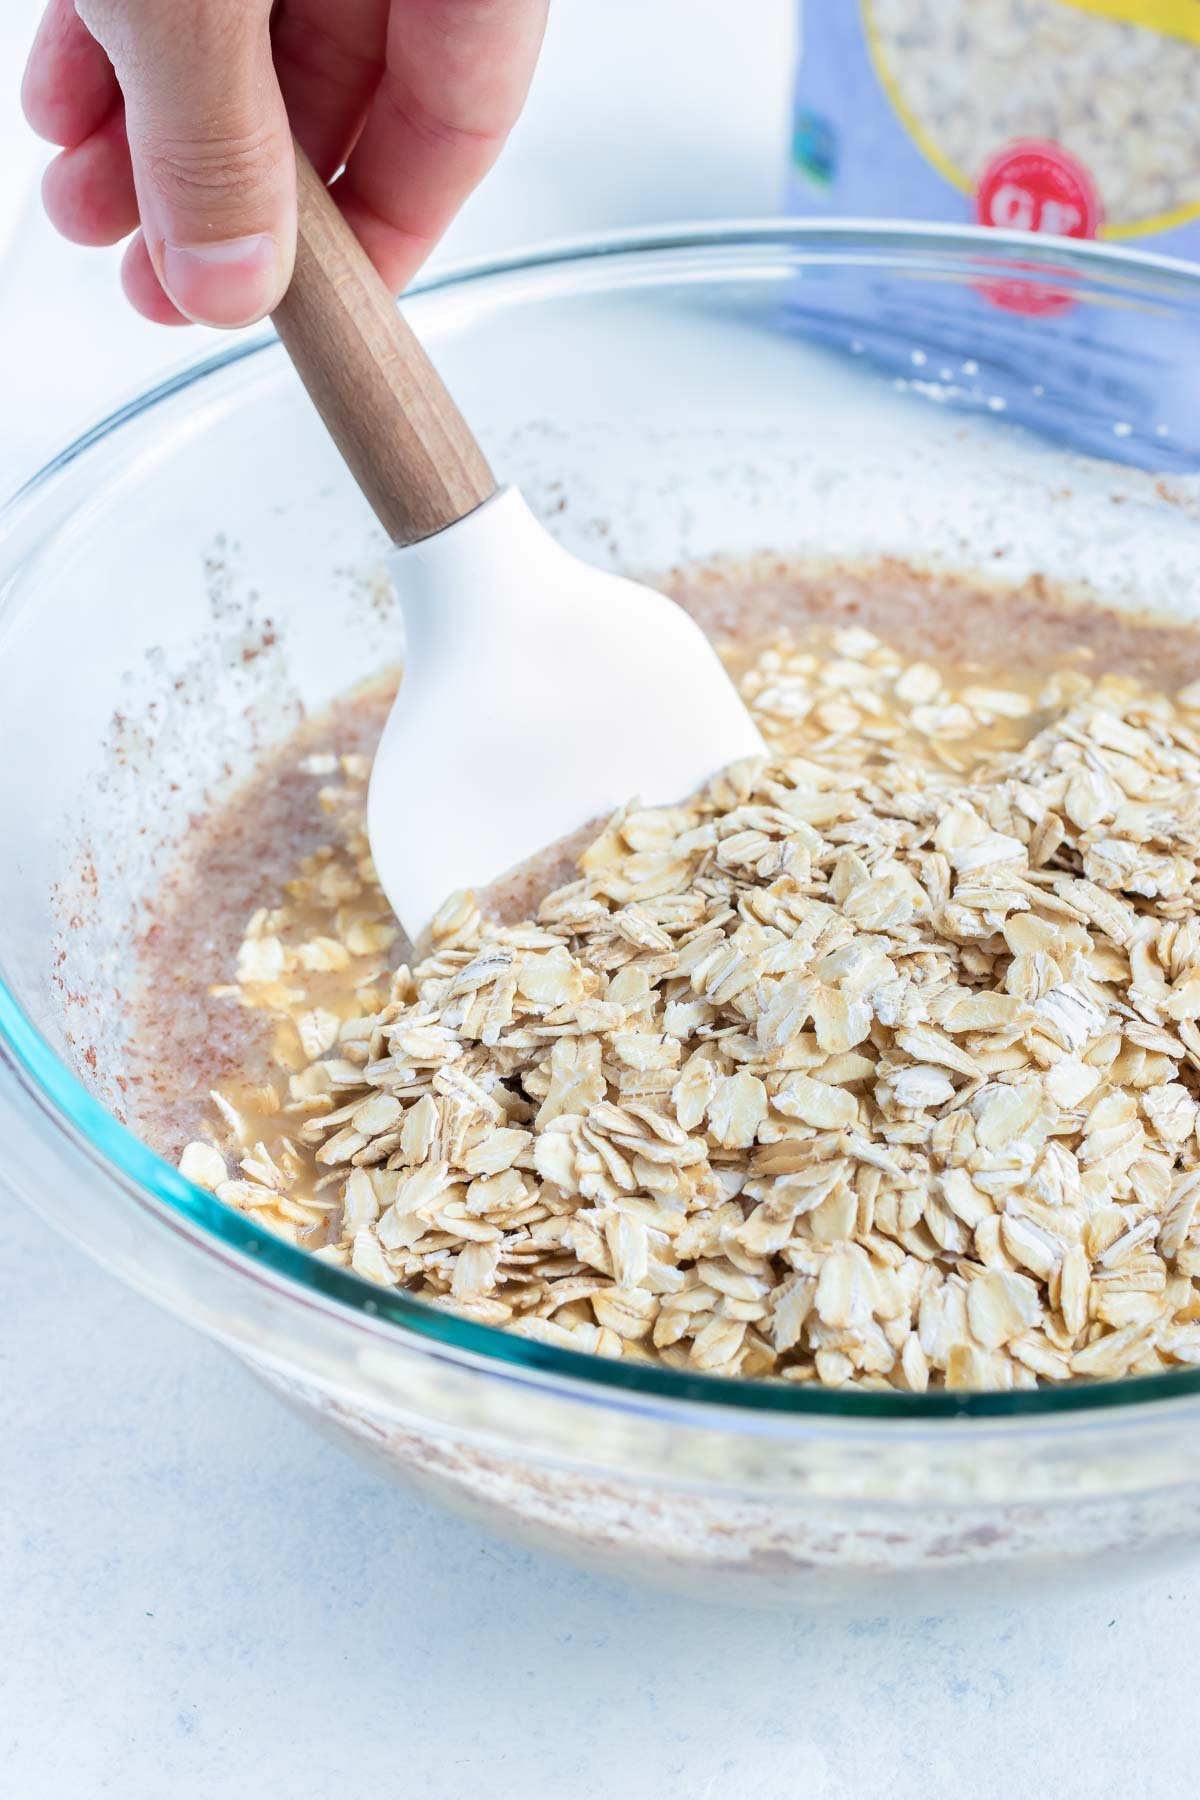 The oats are mixed into the mixture in a bowl.